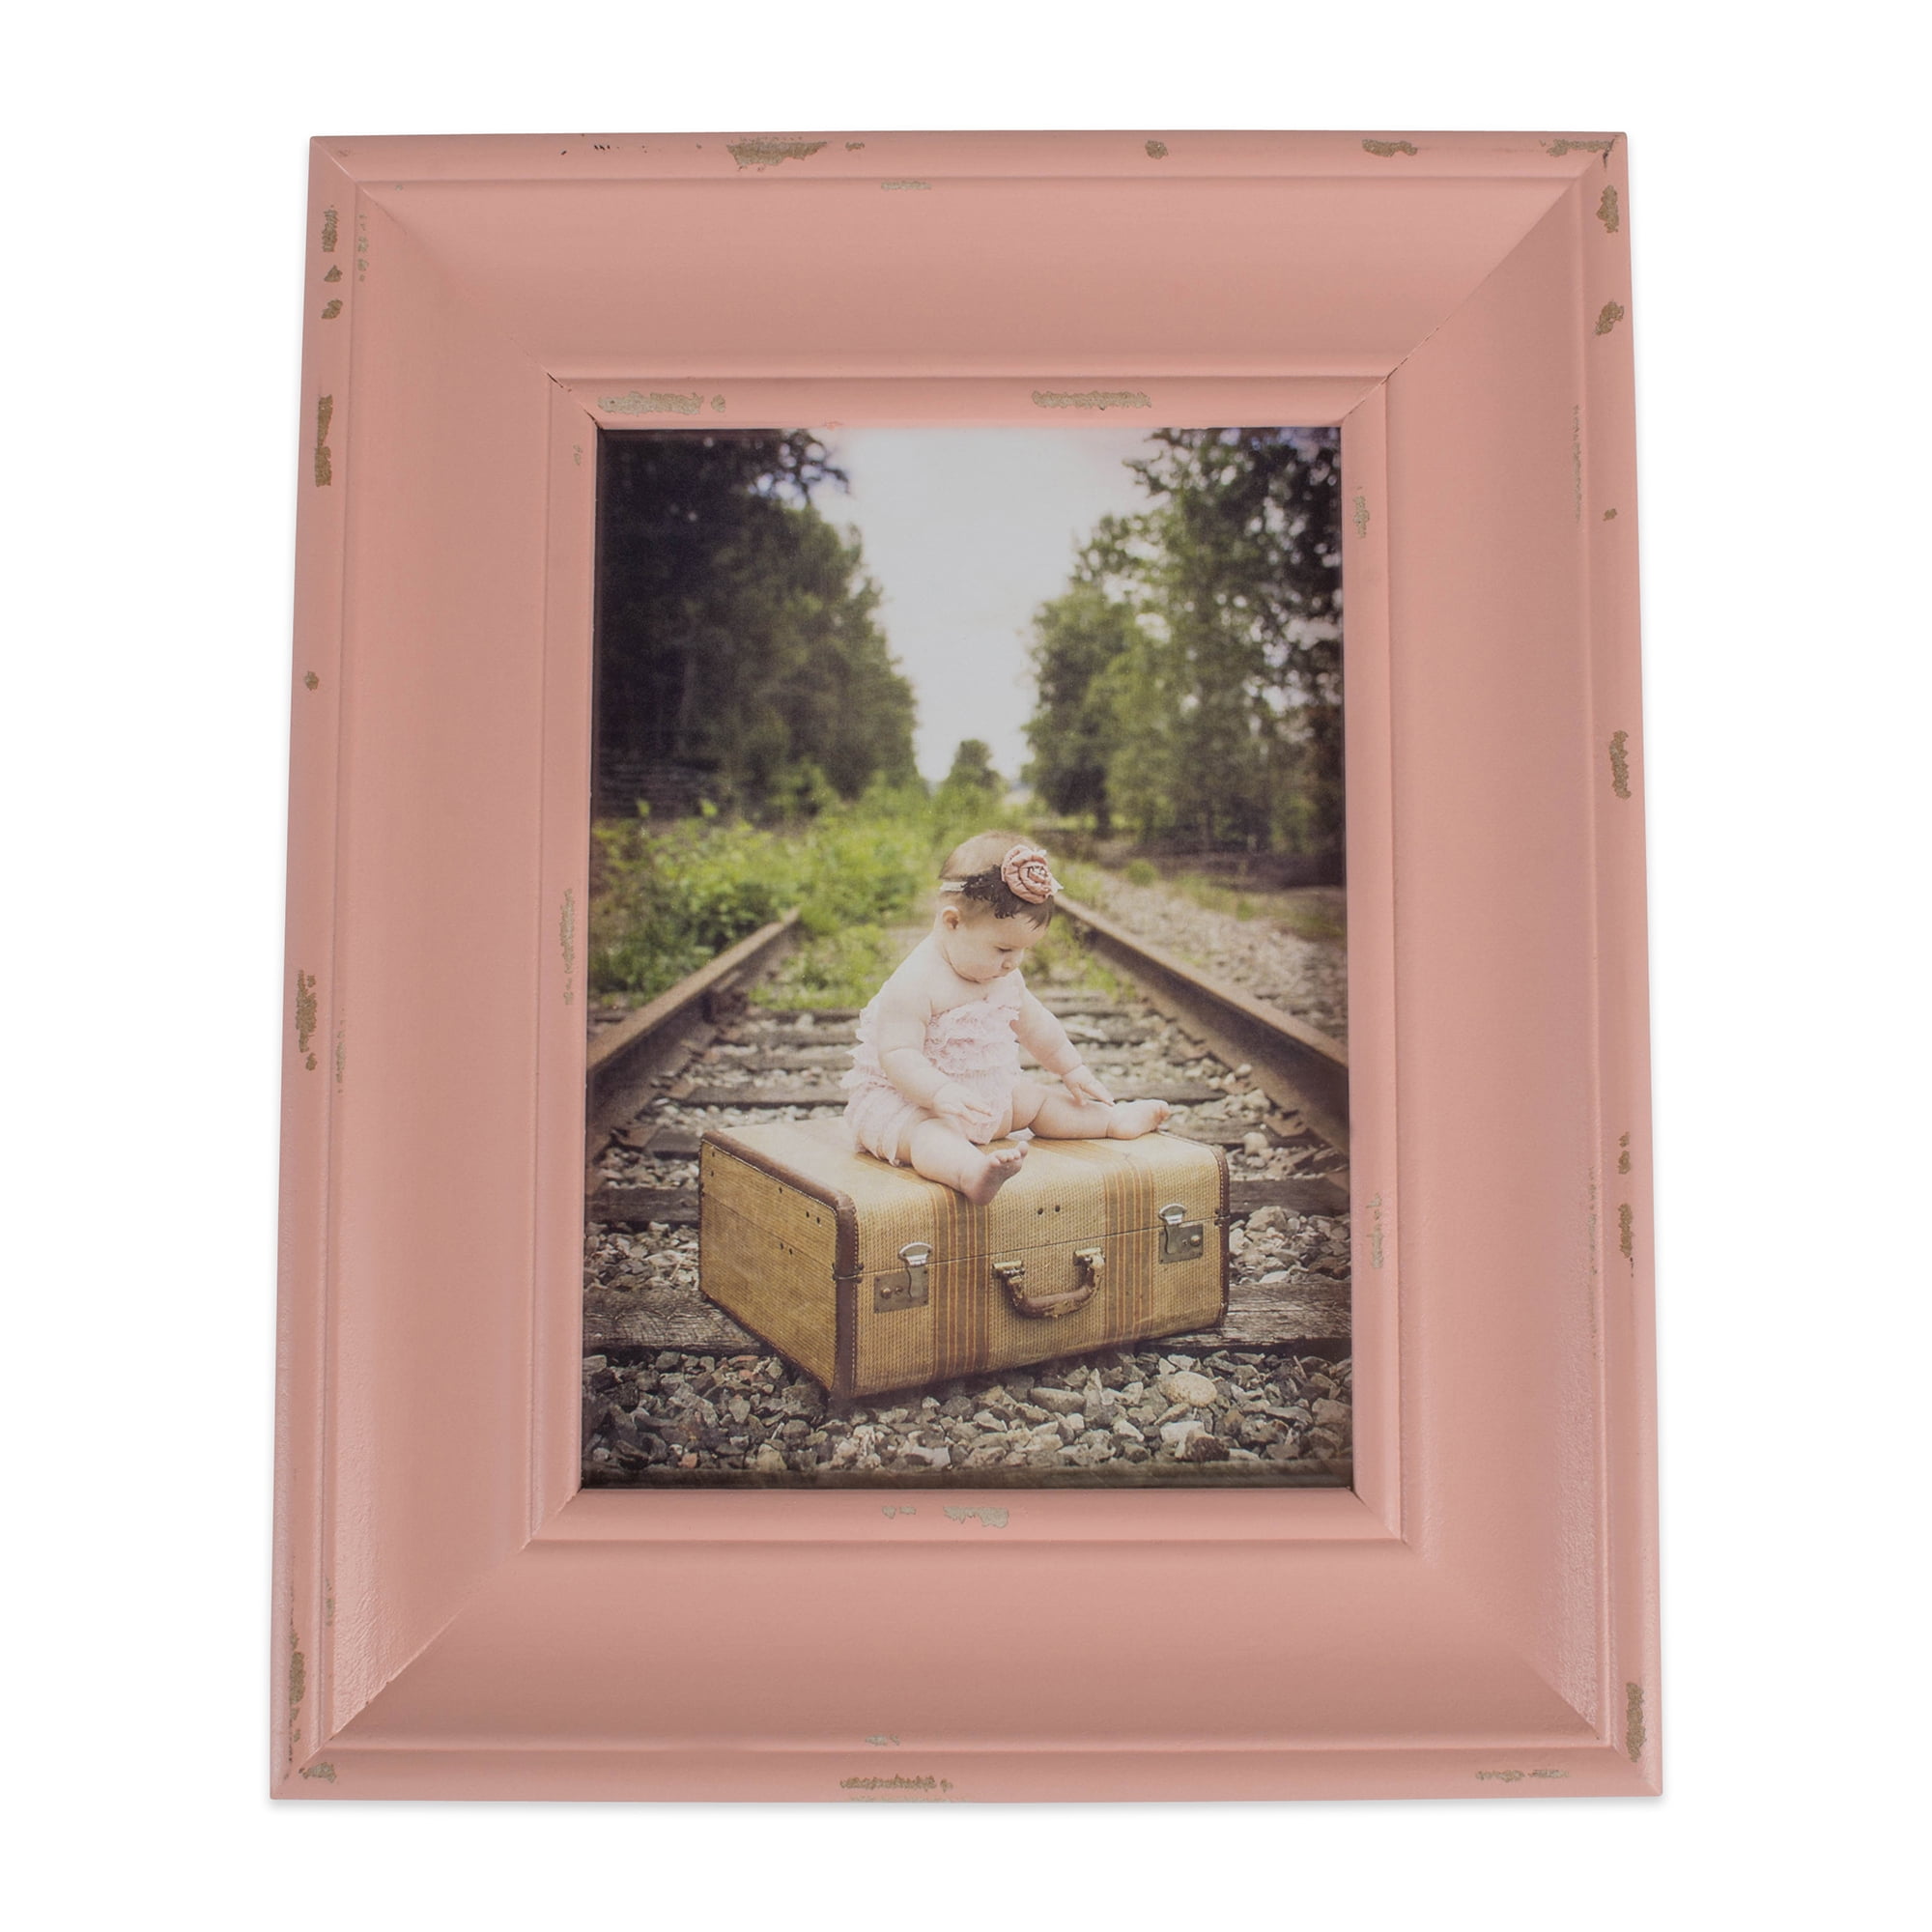 2-5/8 Rustic Barnwood Distressed Wood Picture Frame: 16X24*